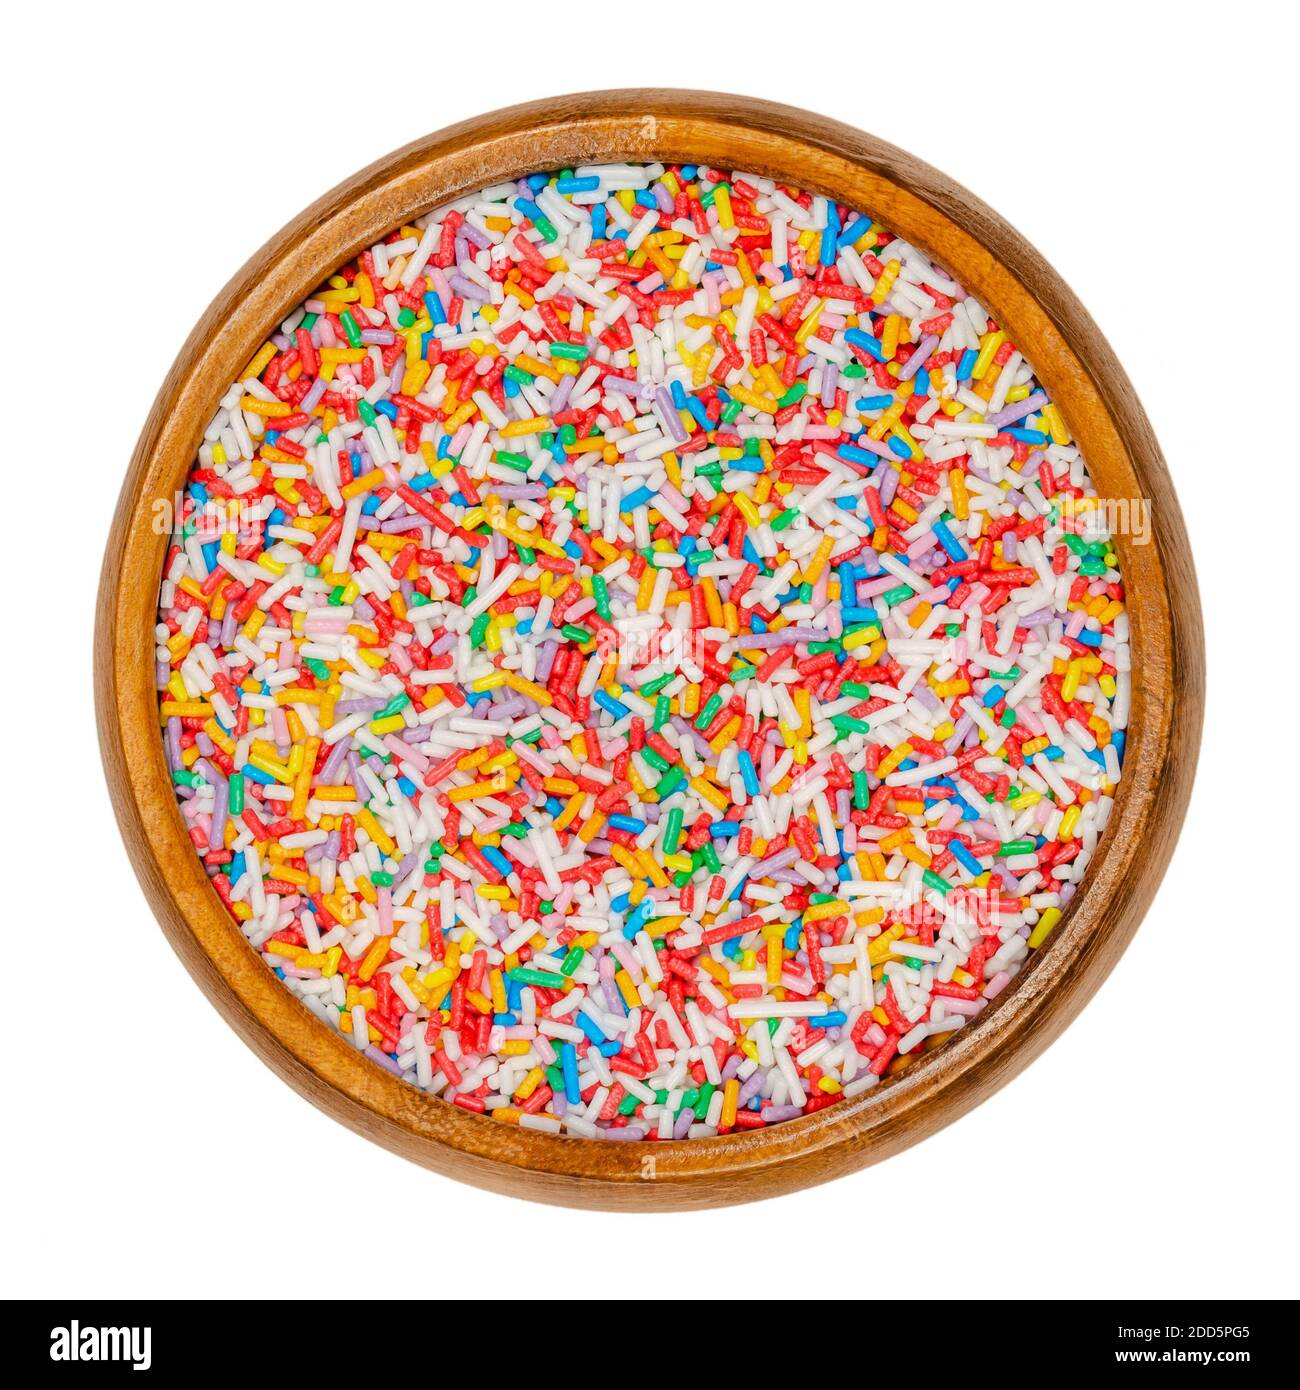 Rainbow sprinkles in a wooden bowl. Rod-shaped colorful sugar sprinkles. Tiny candies in a variety of colors, used as decoration or topping. Close-up. Stock Photo